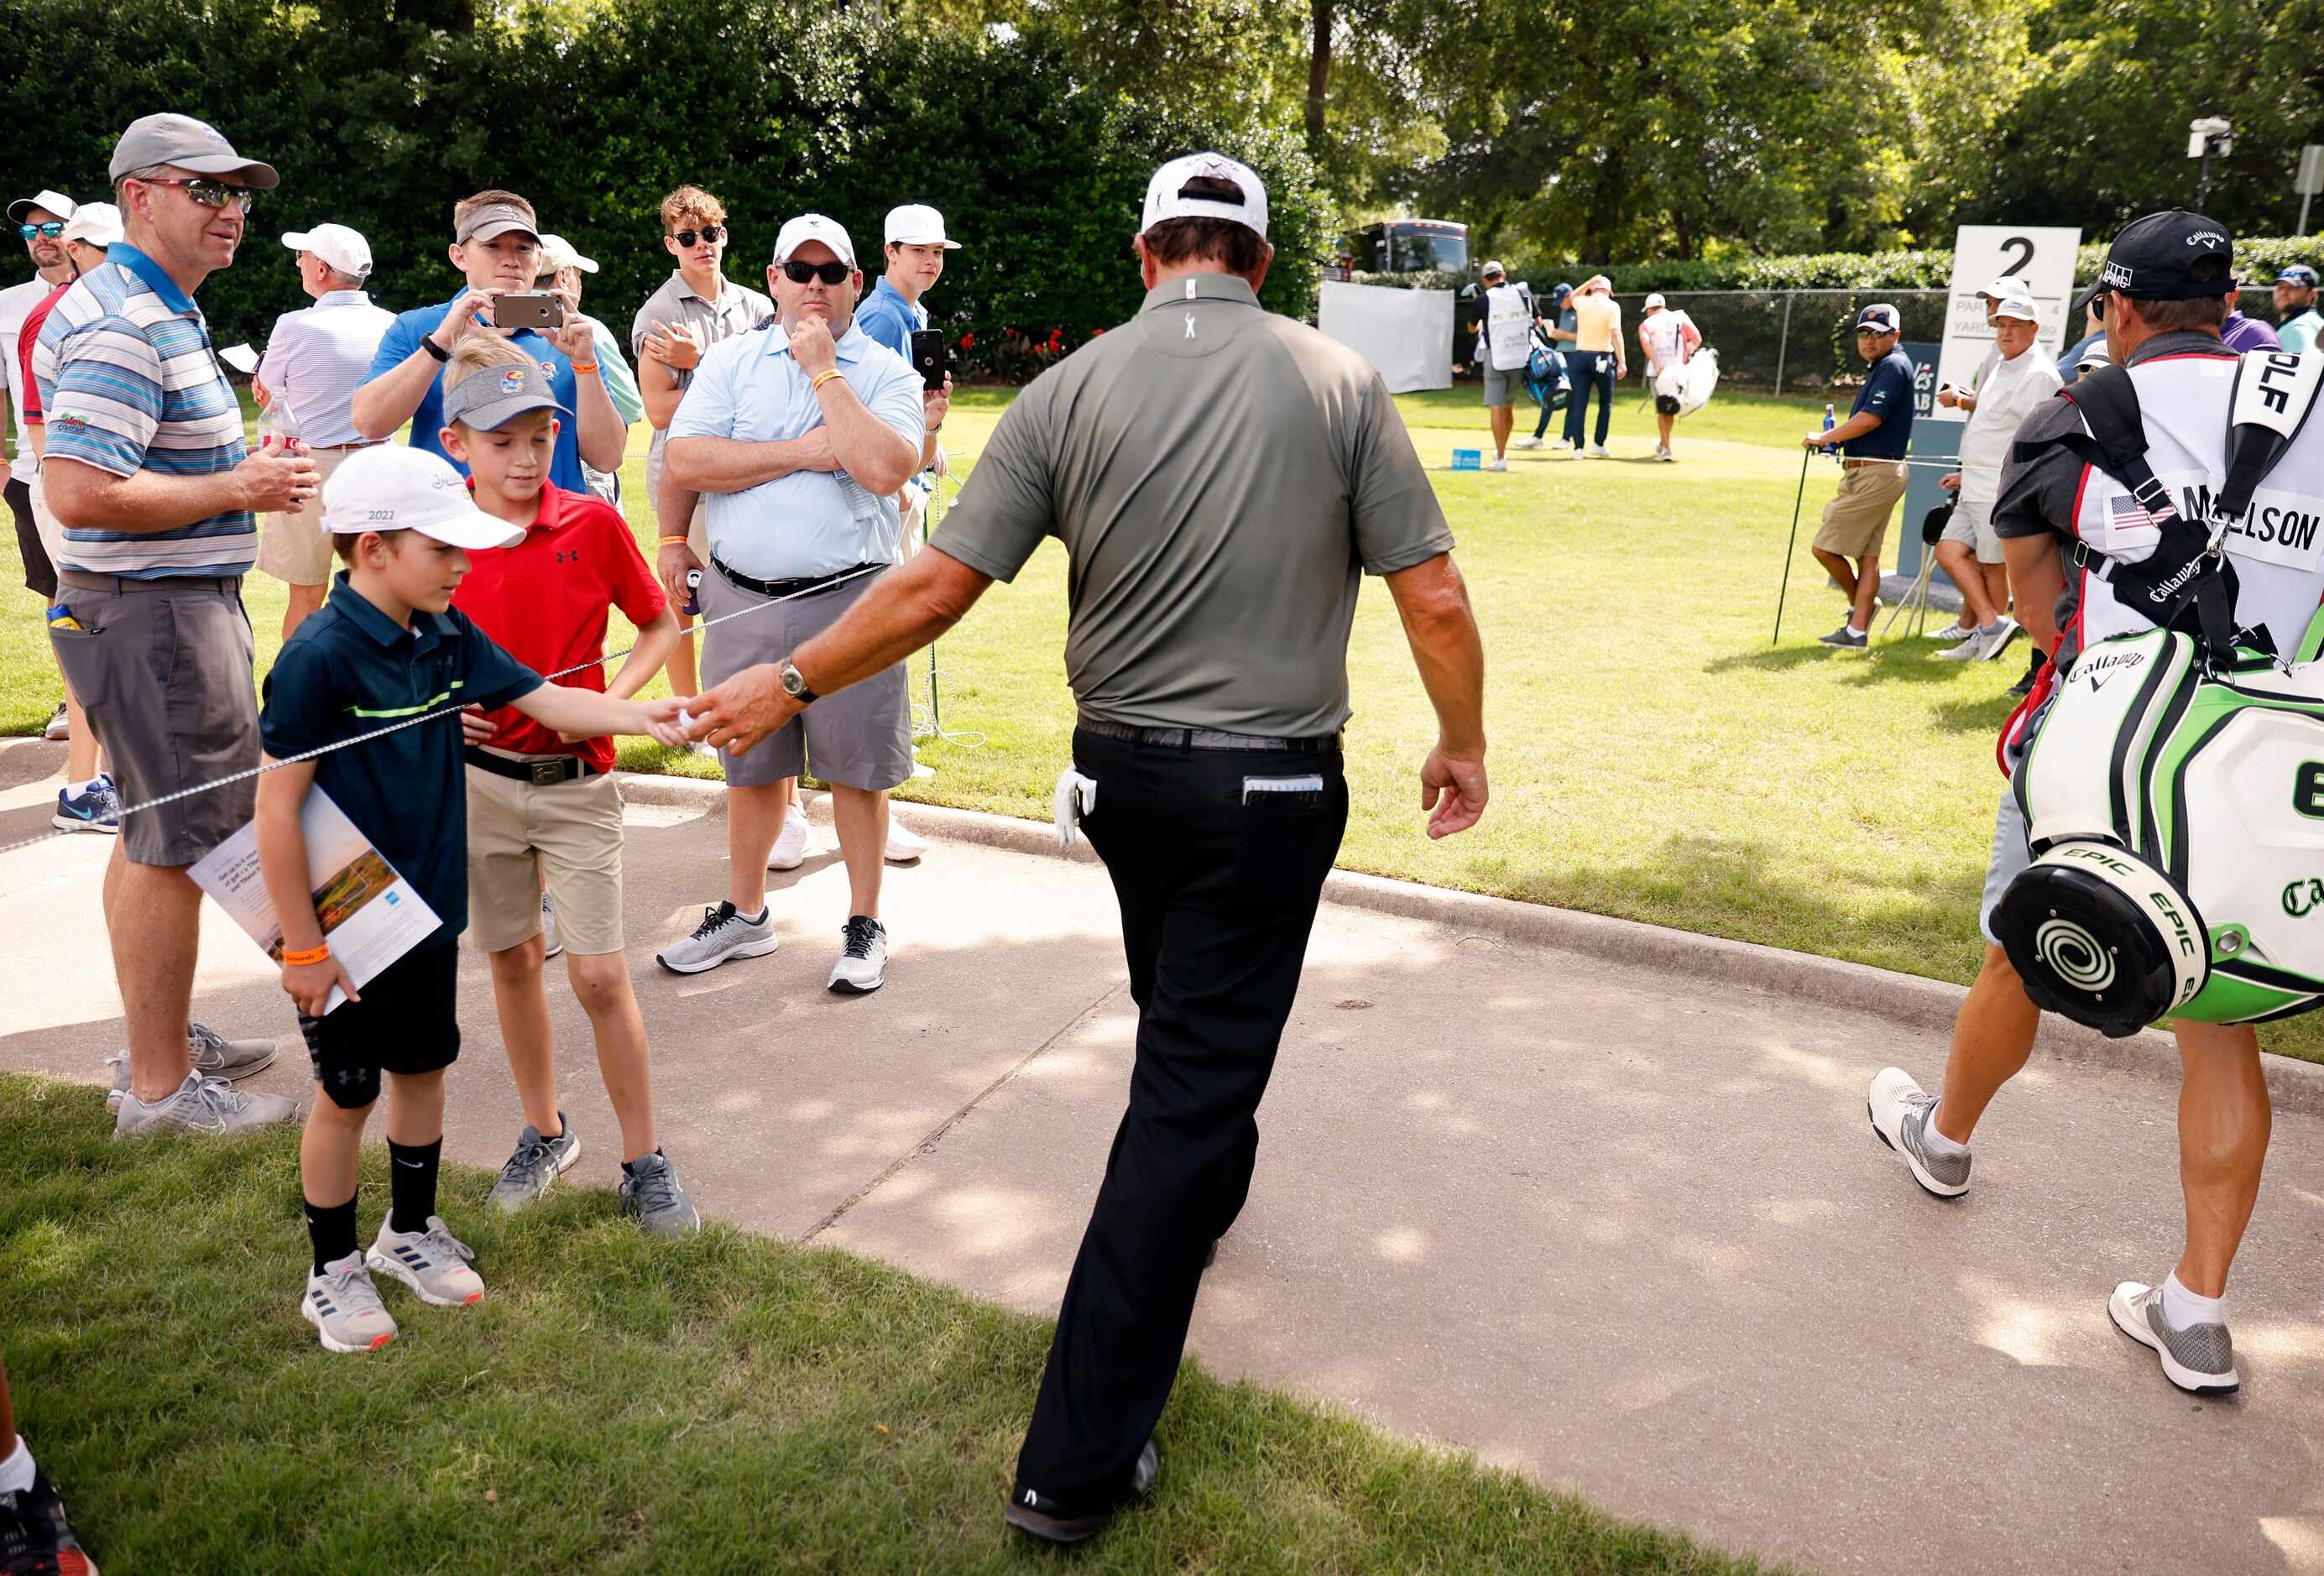 Professional golfer Phil Mickelson hands his ball to a young fan after making par on No. 1...